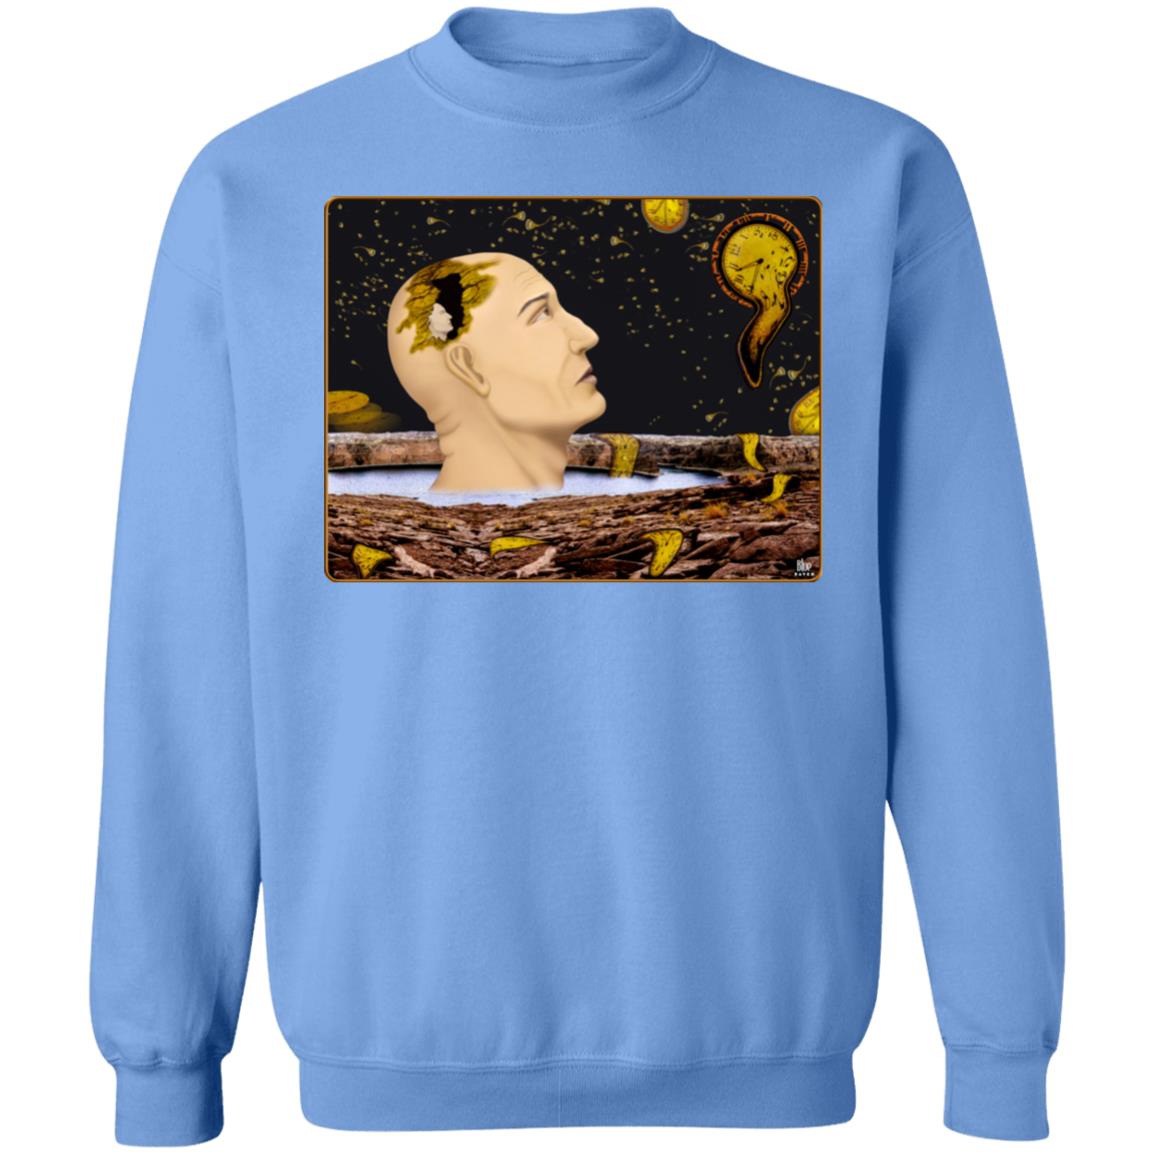 Earth Time Running Out - Unisex Crew Neck Sweatshirt